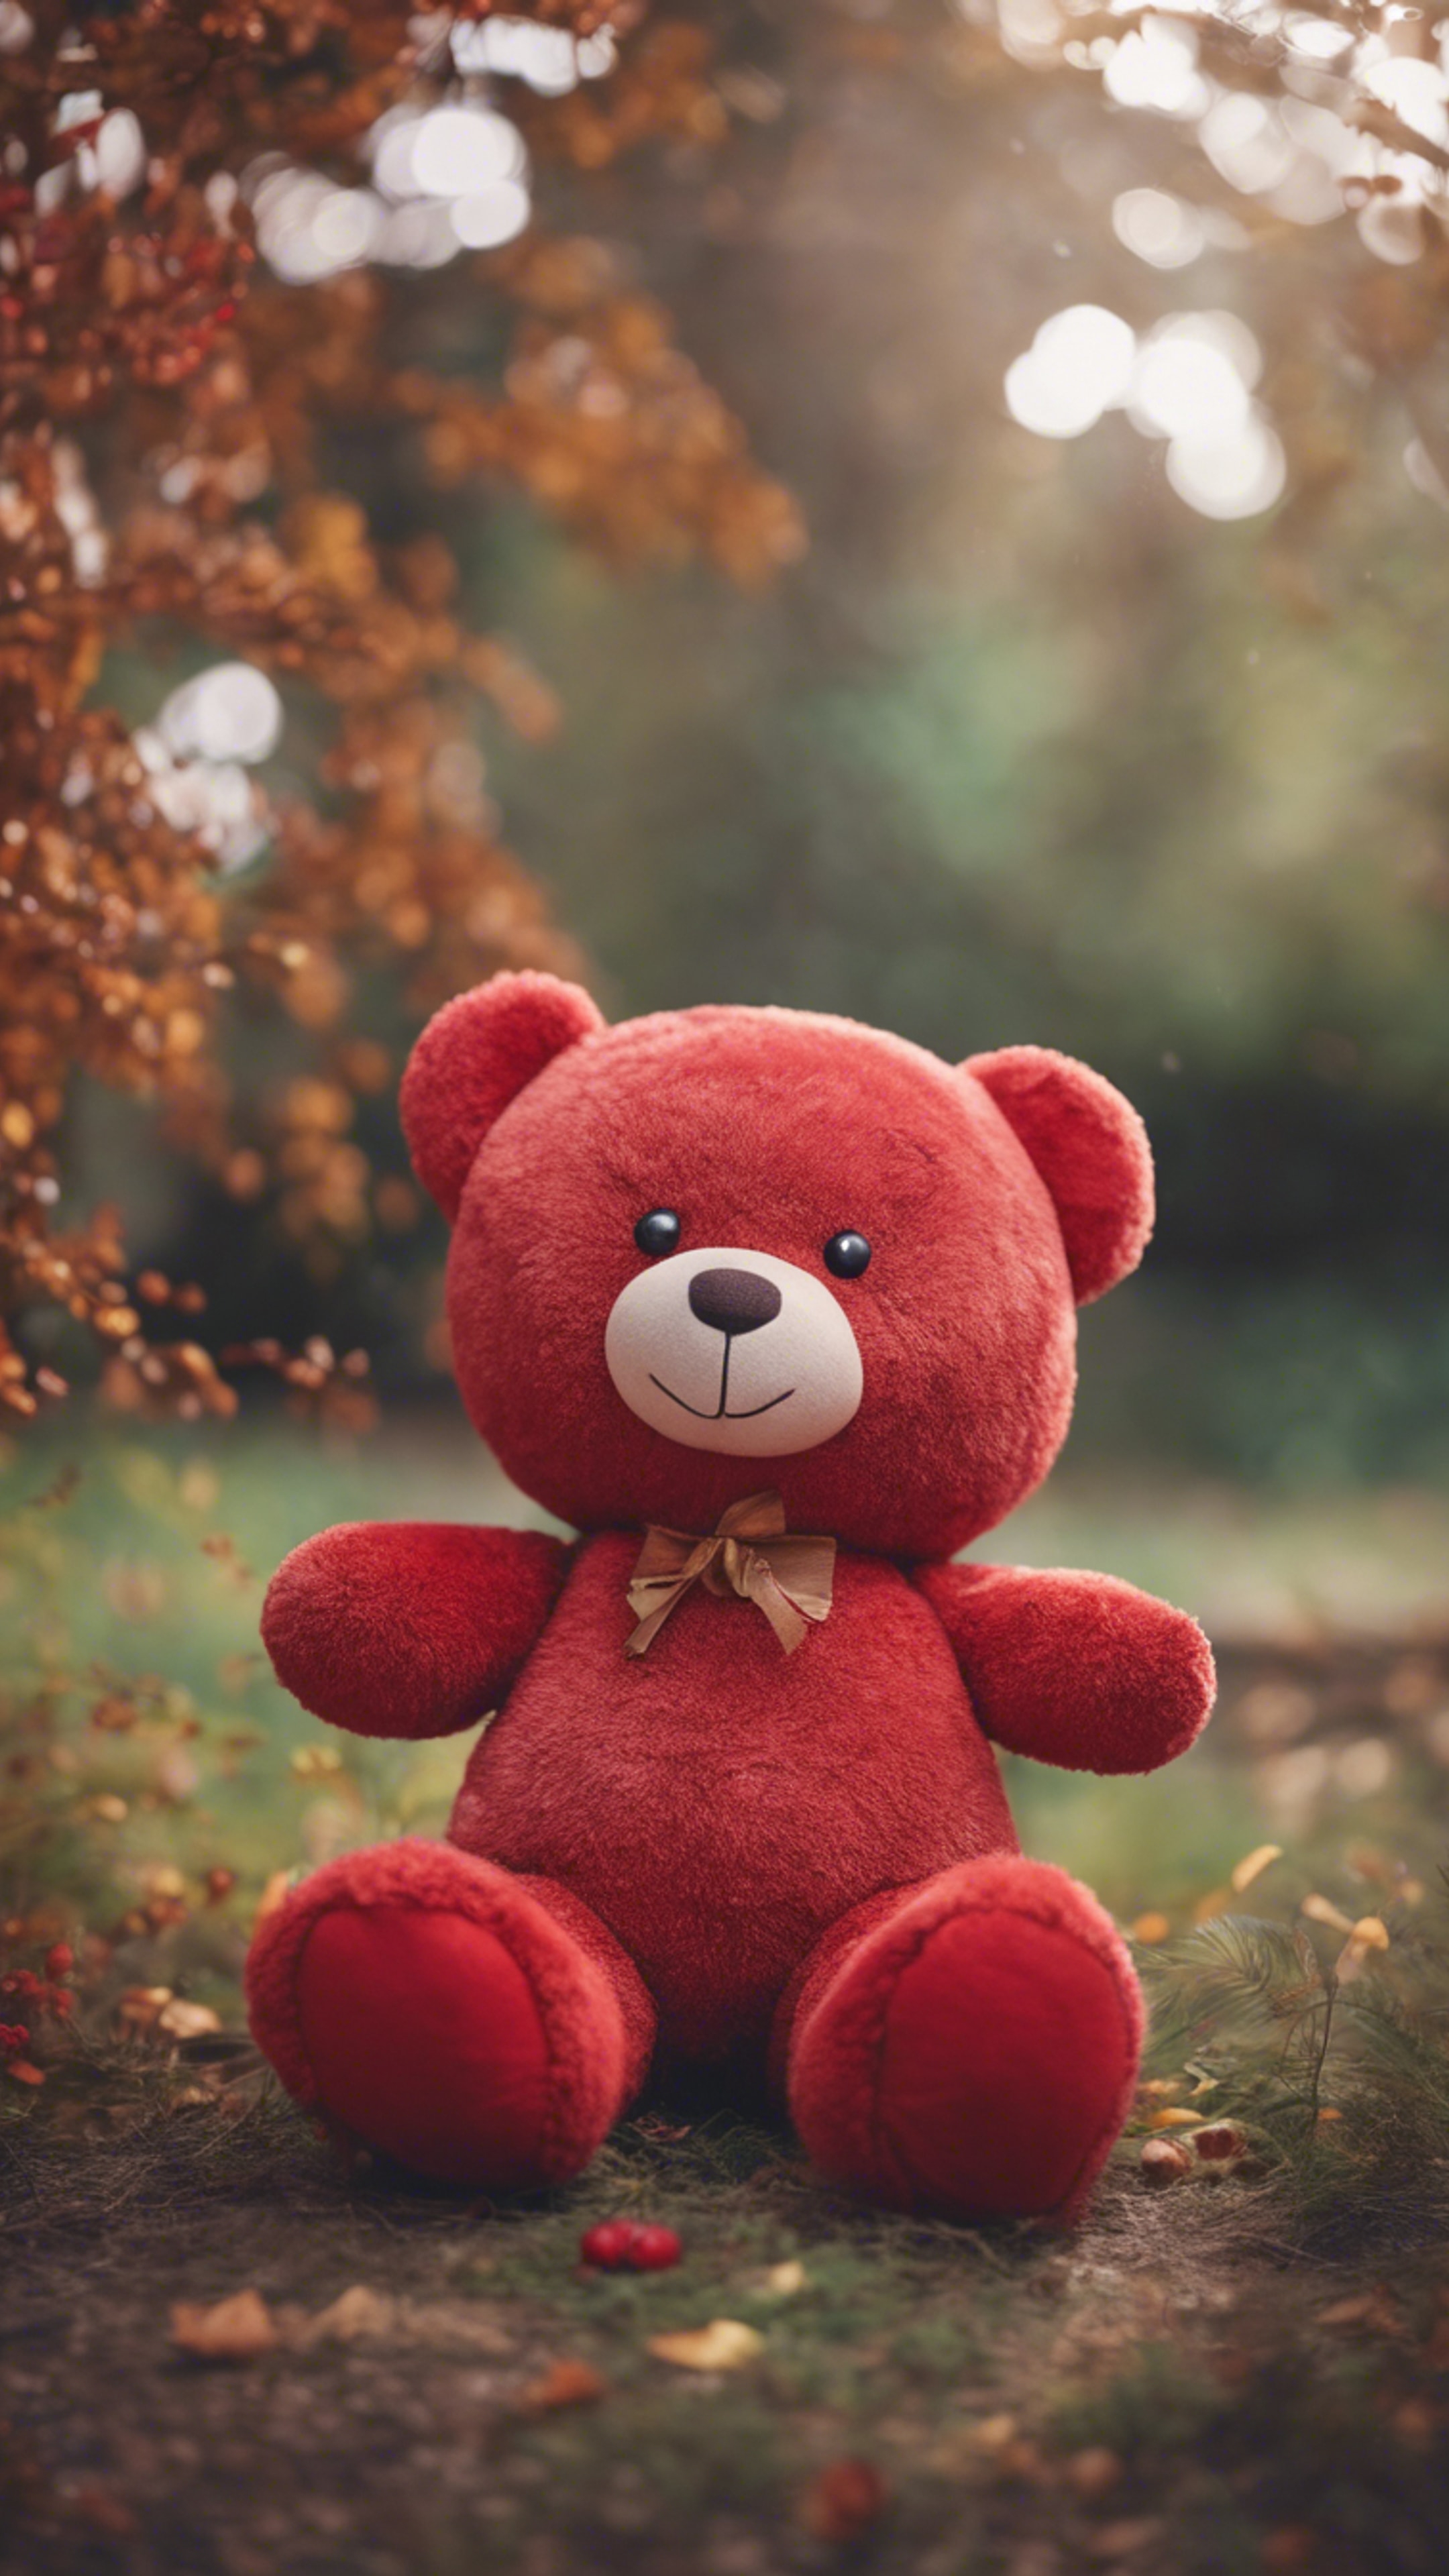 A giant red, kawaii-style teddy bear with a sweet, endearing expression. Wallpaper[a6adde984d914b9f99da]